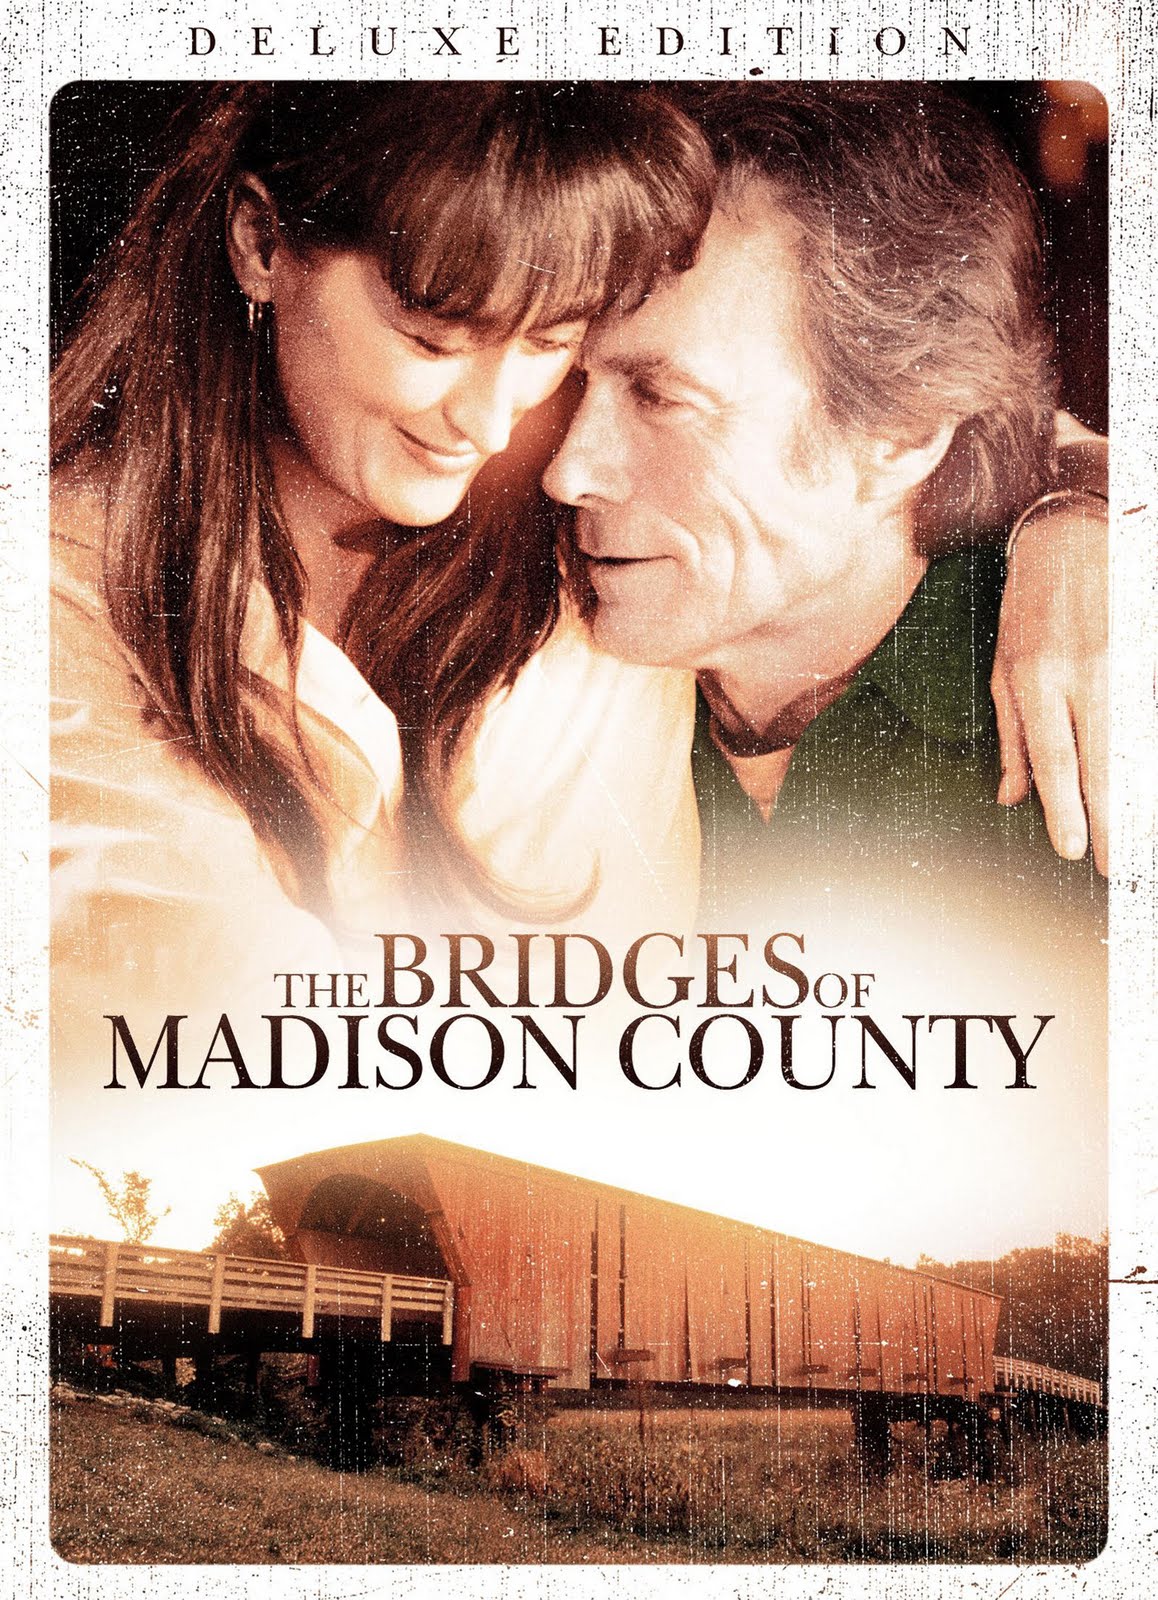 MOVIE POSTERS: THE BRIDGES OF MADISON COUNTY